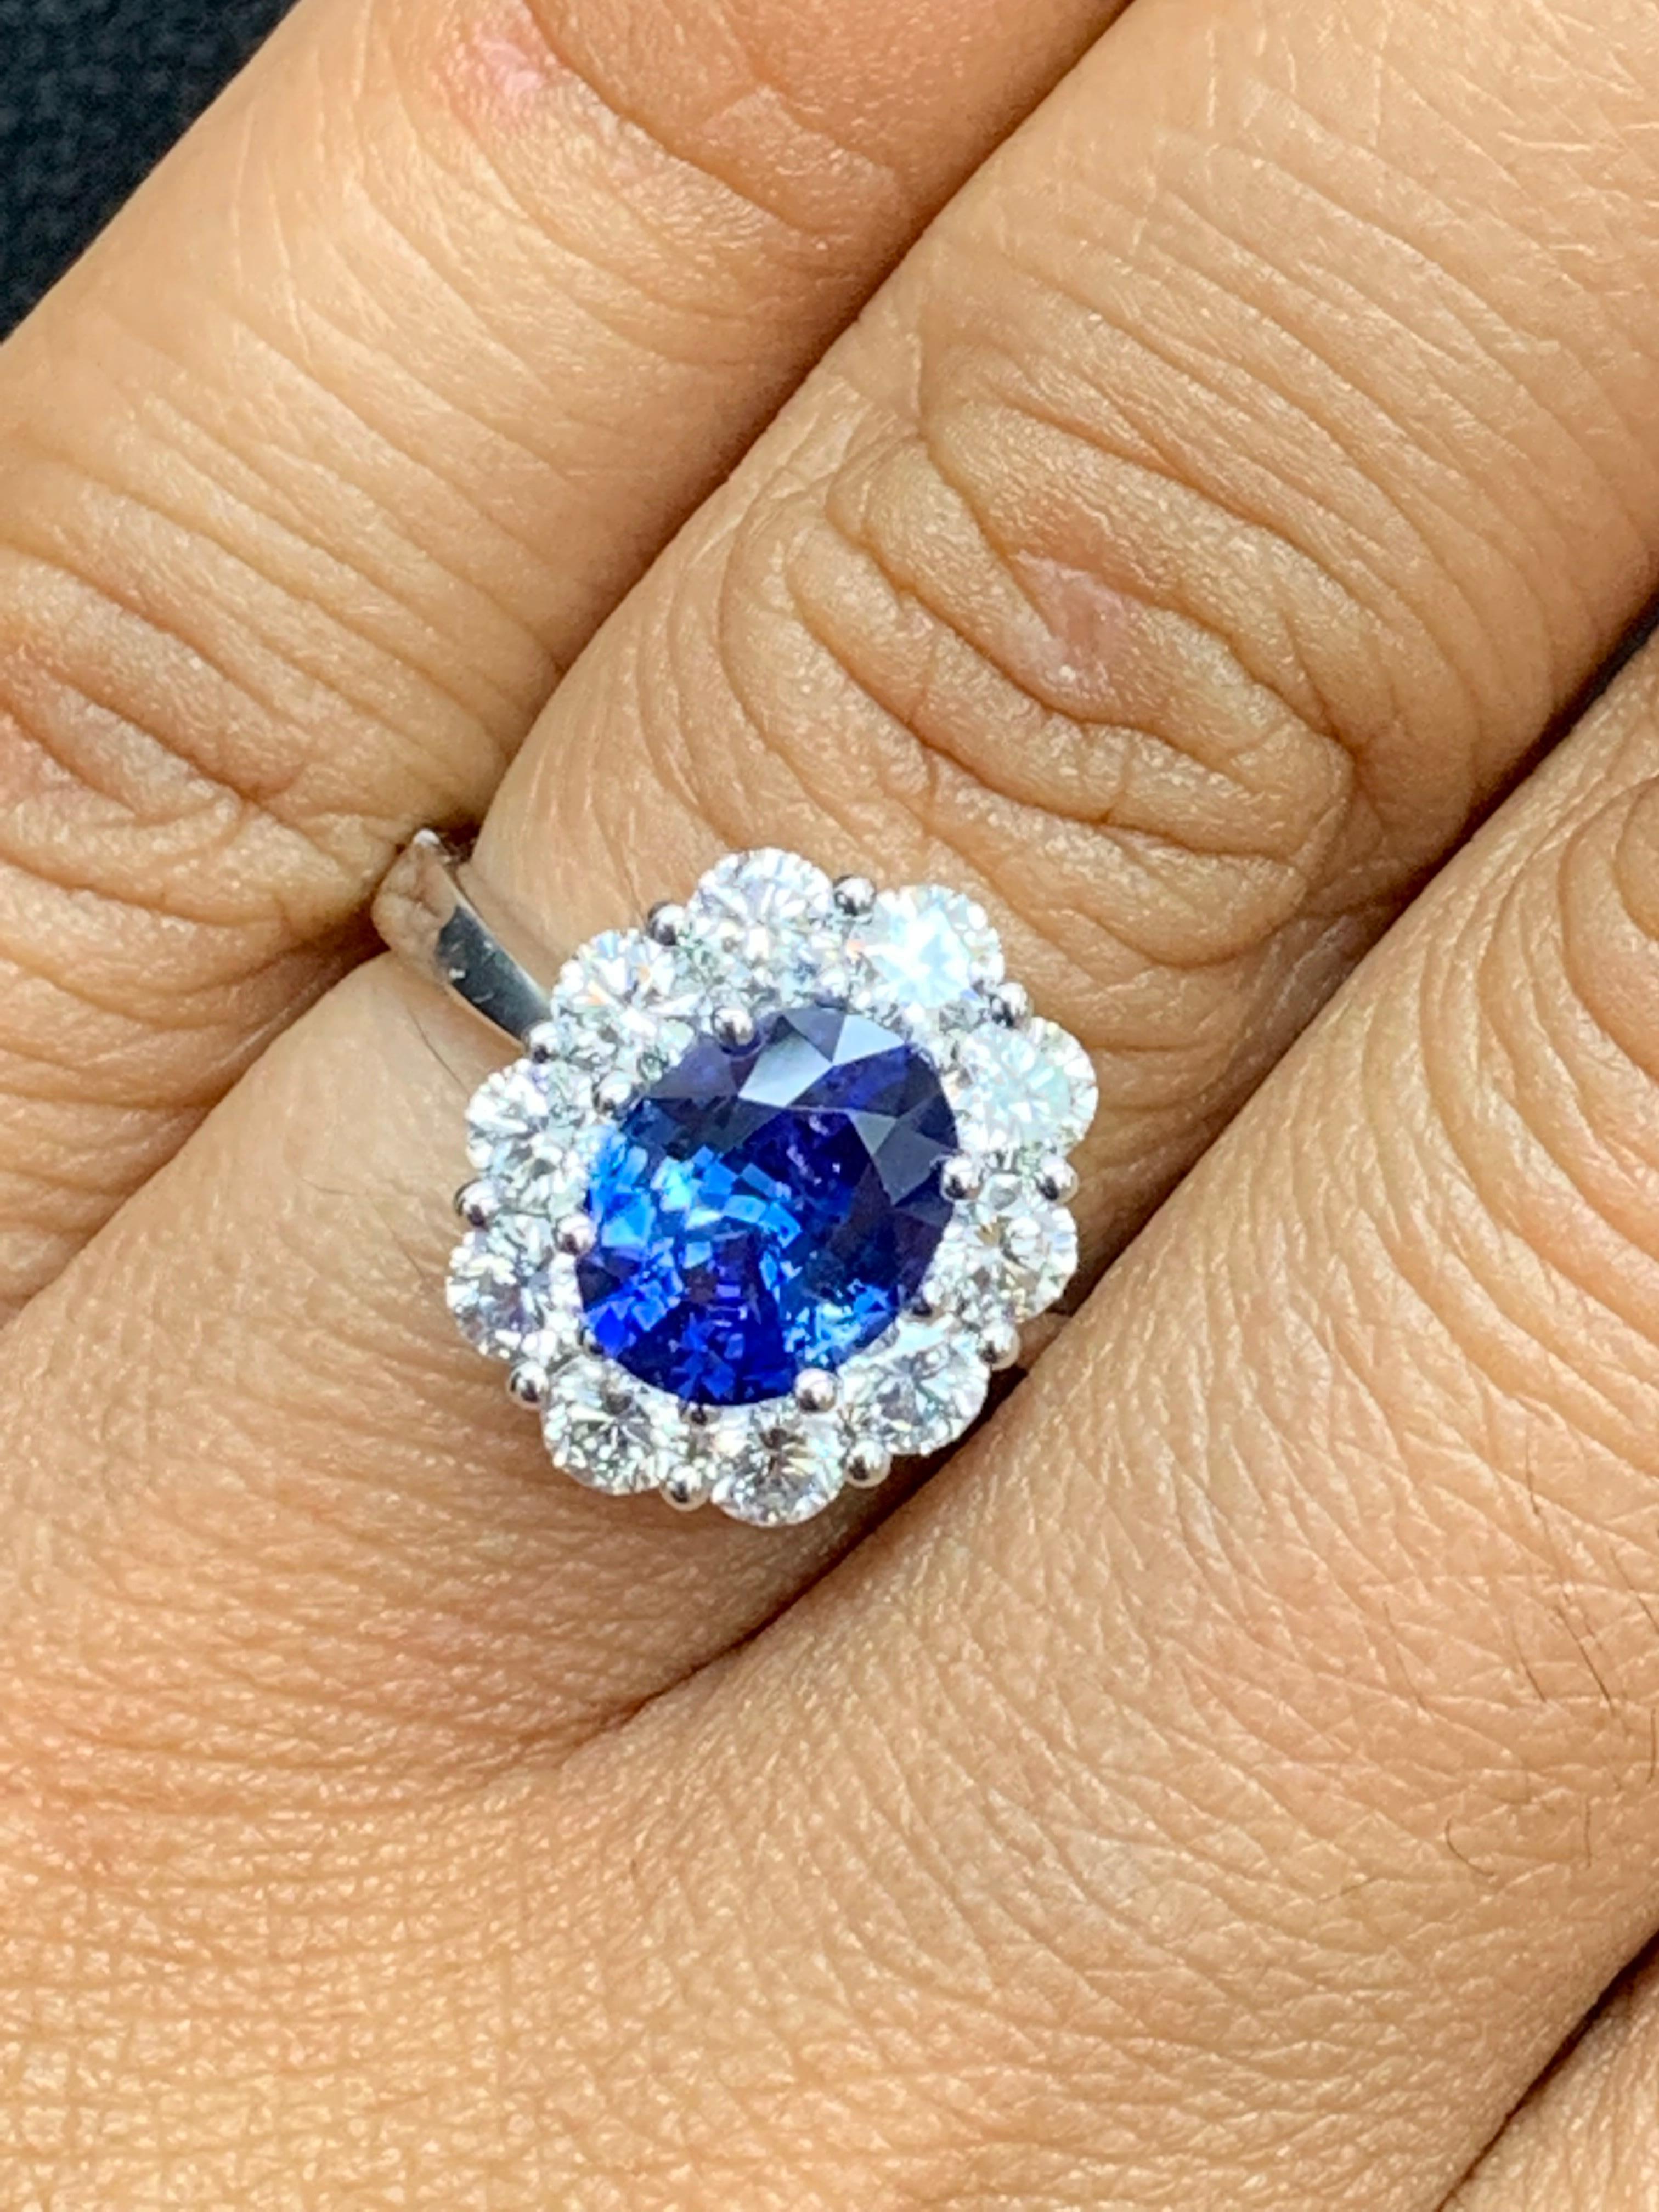 Showcasing a color-rich oval cut blue sapphire weighing 1.87 carats, surrounded by a single row of brilliant-cut diamonds set in a flower design halo. 10 Diamonds weigh 
1.17 carats total. Made 18k white gold 

Style available in different price